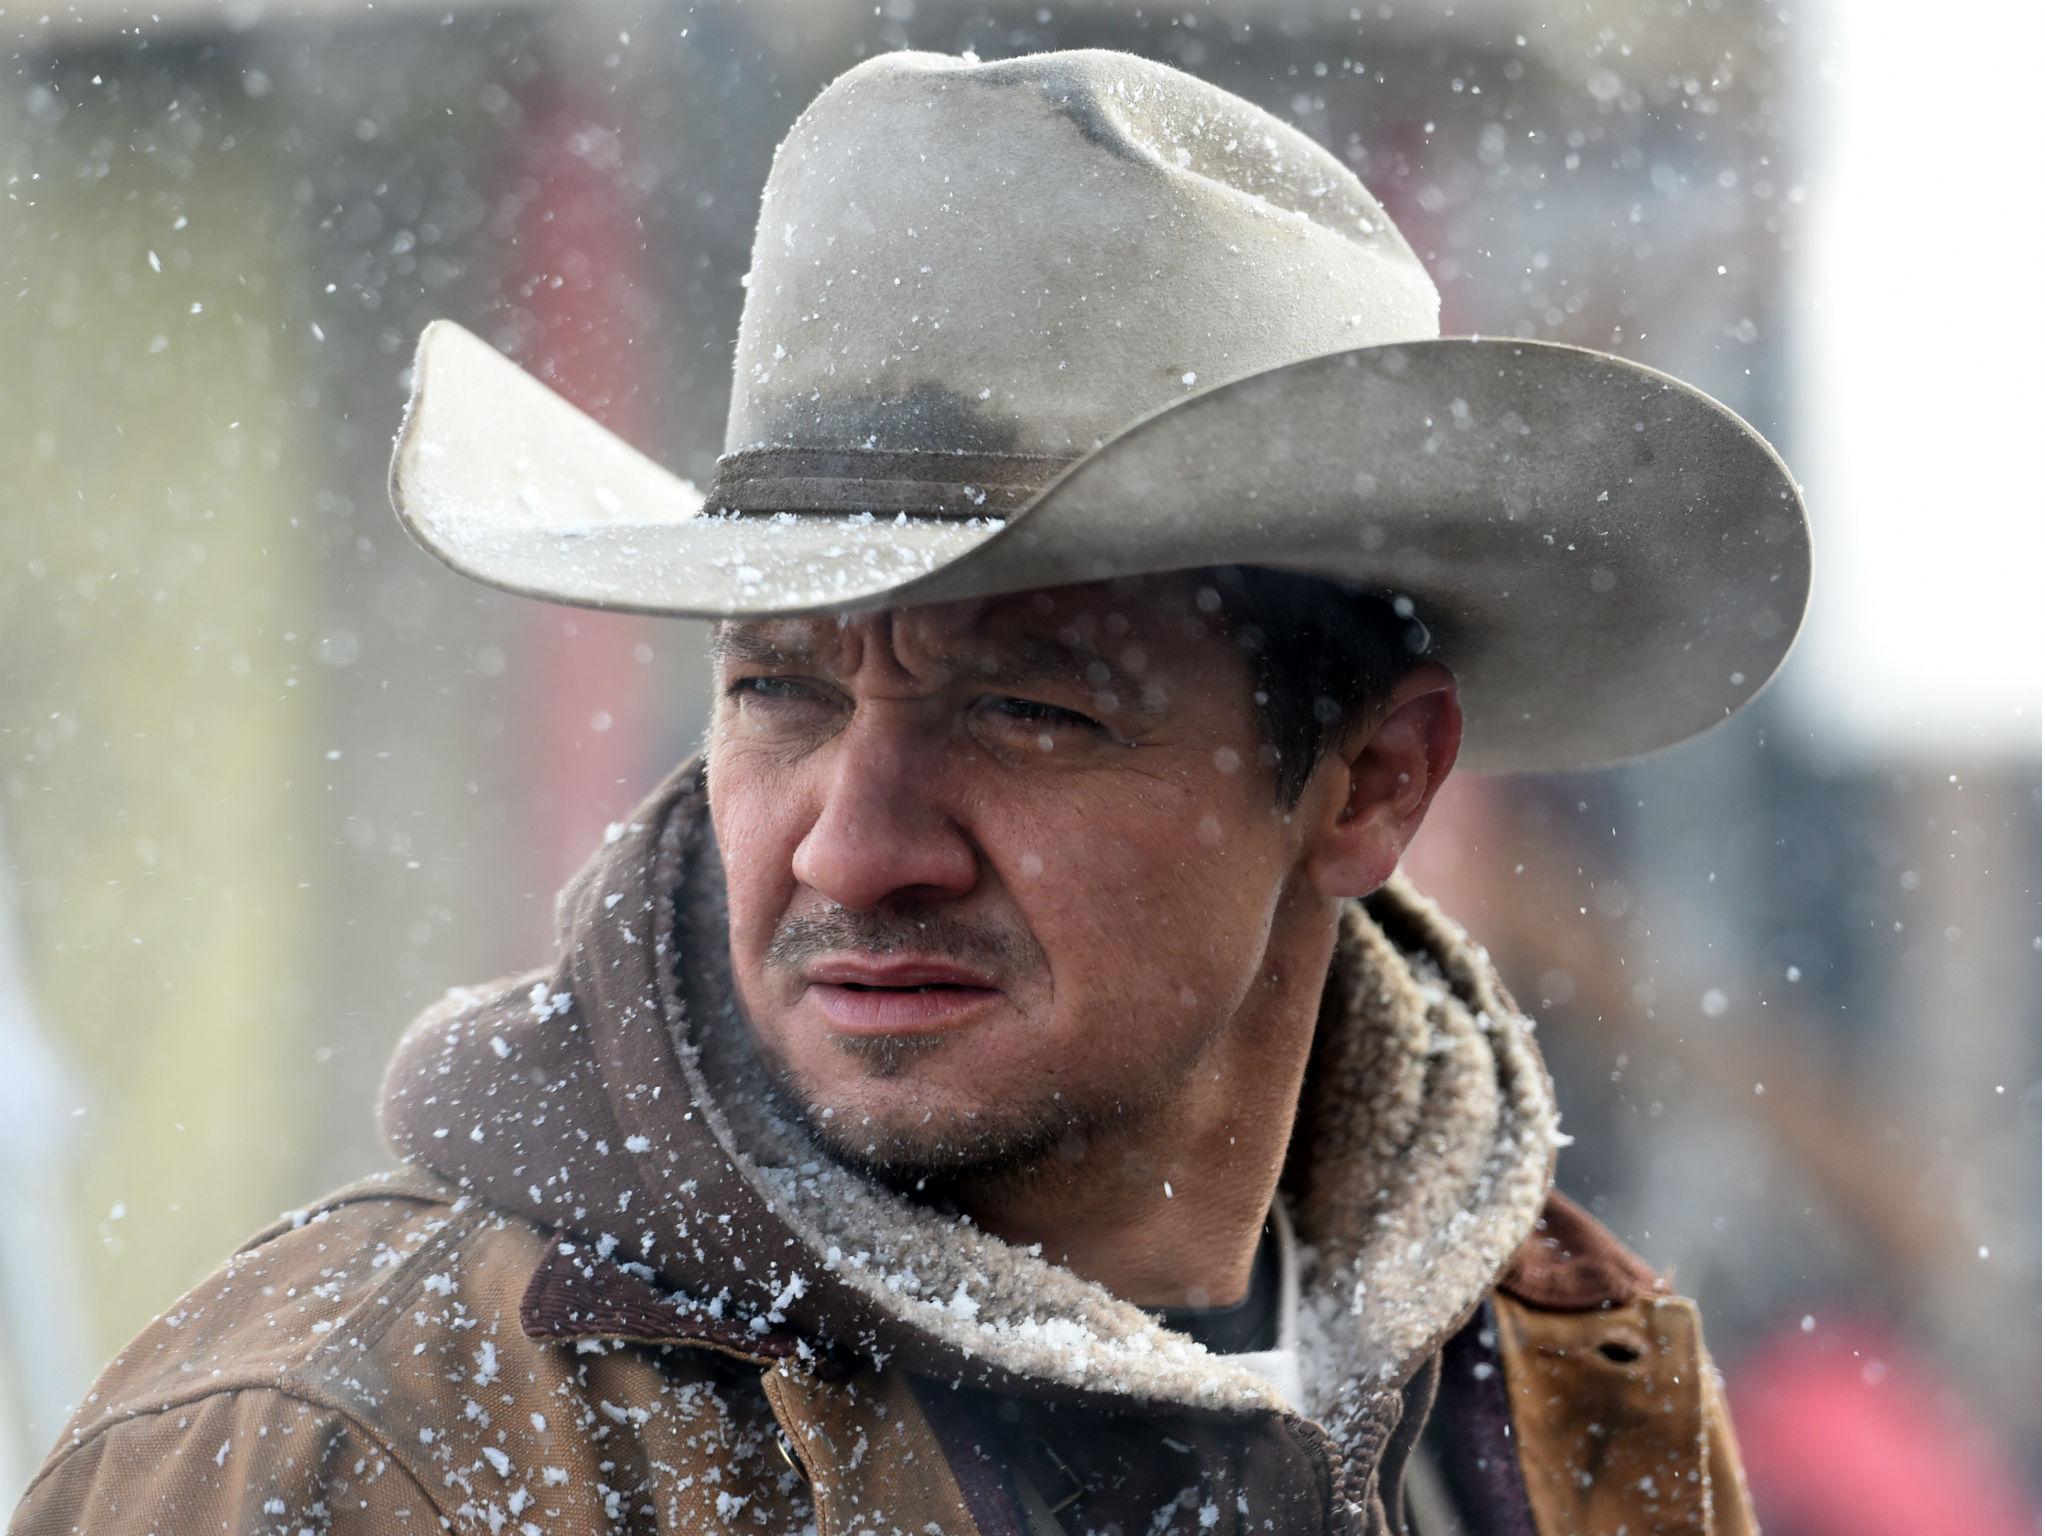 Wind River star Jeremy Renner: 'Being a father is number one